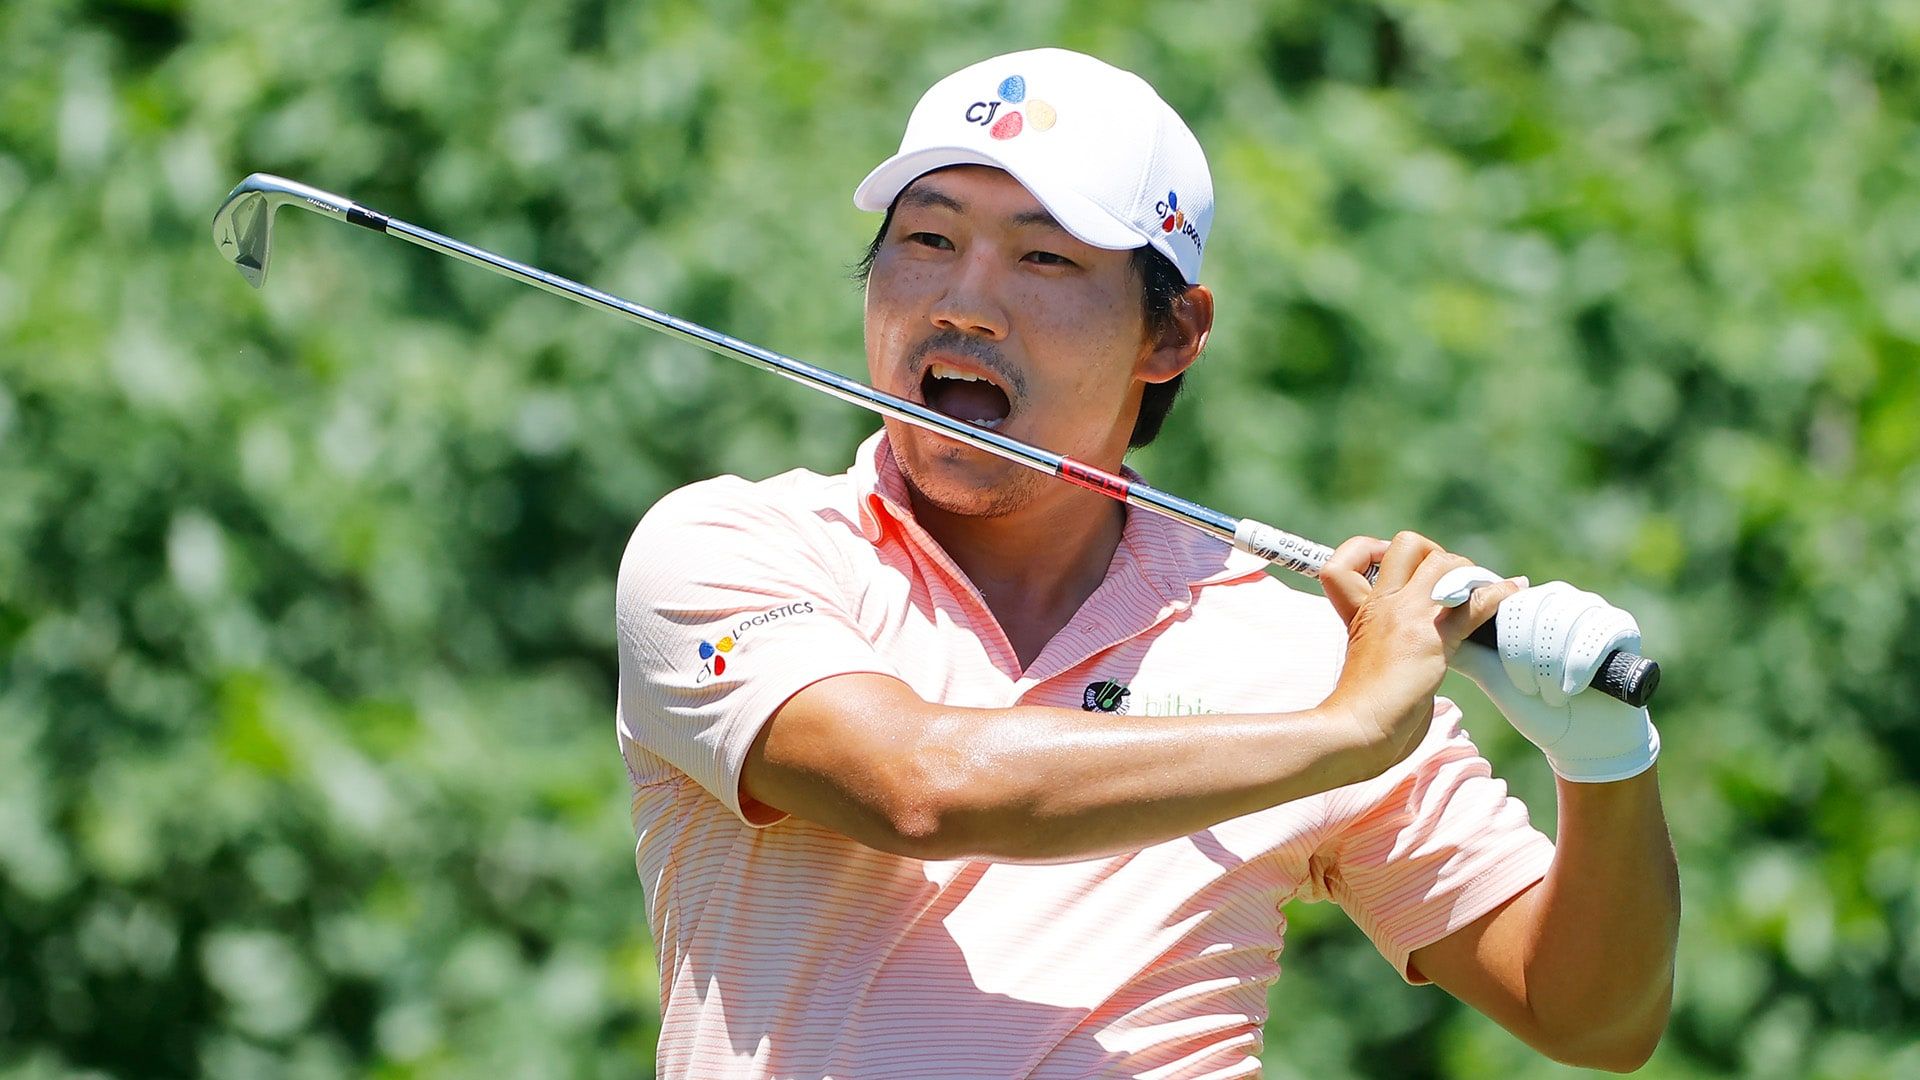 Sung Kang makes an ace at Colonial and the no longer-crowd goes no longer-wild